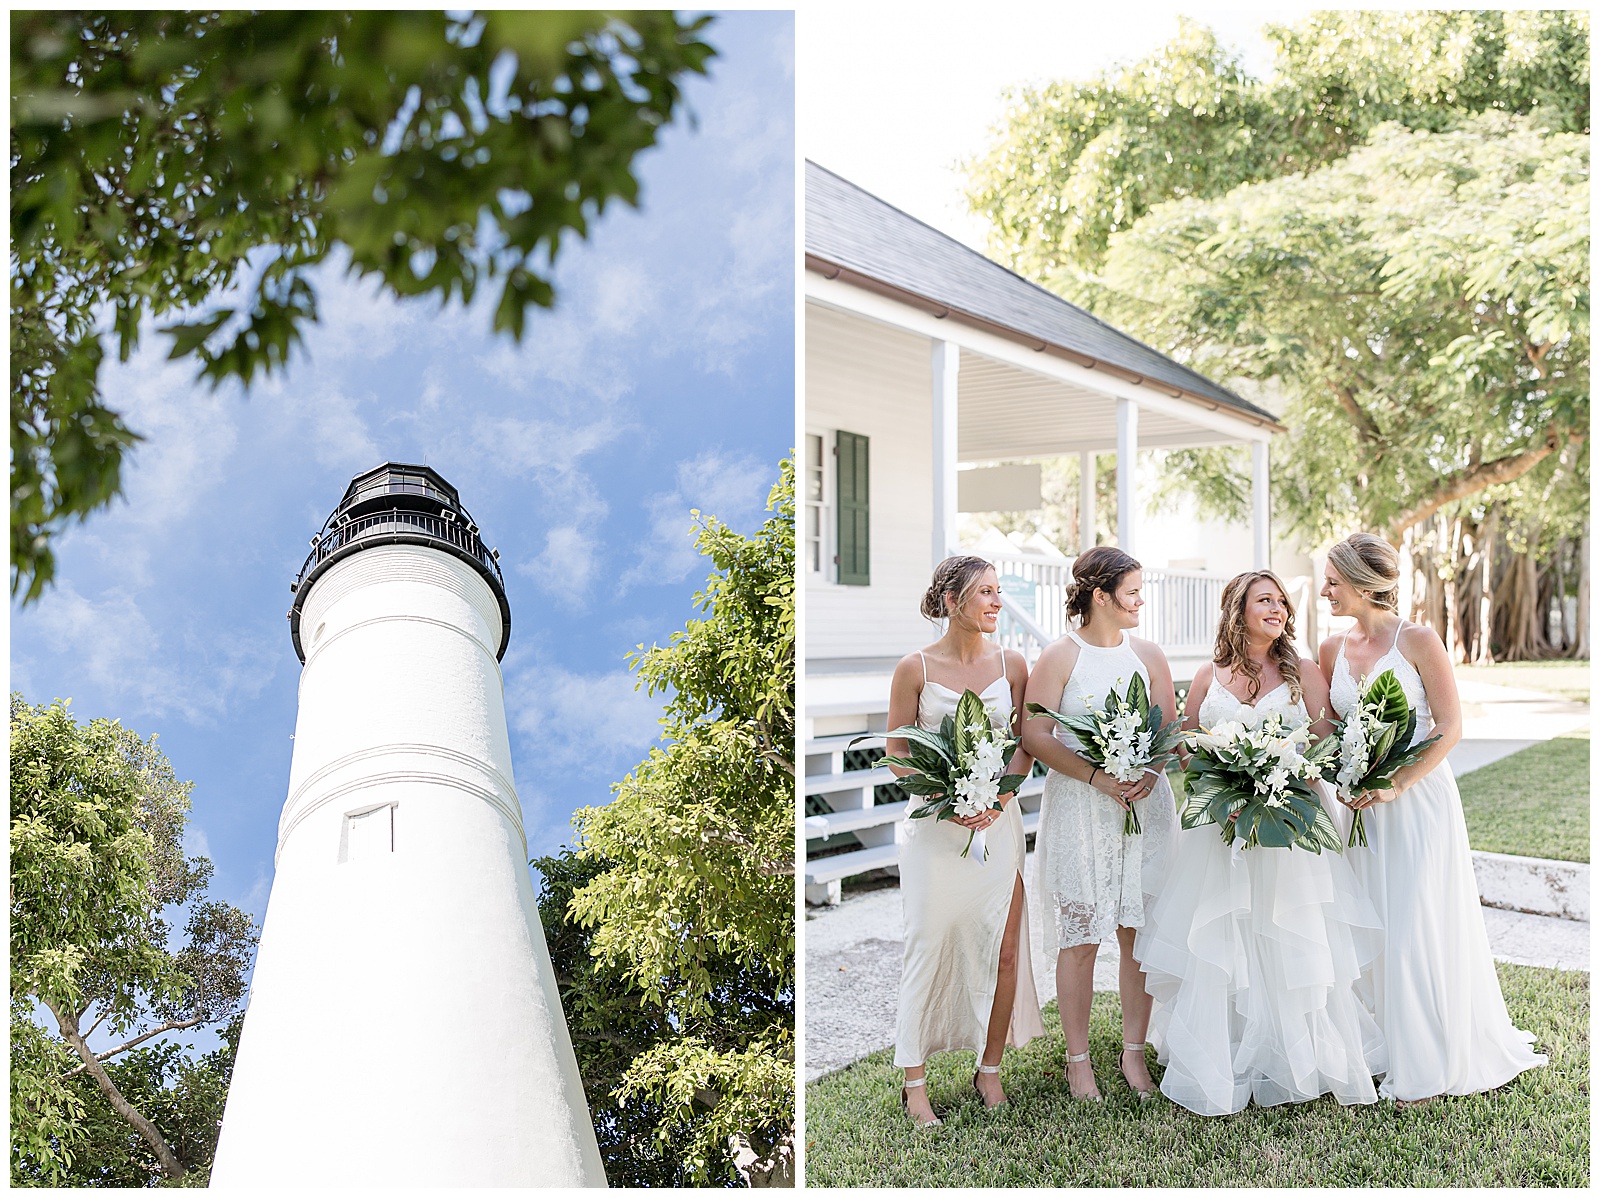 beautiful white lighthouse on sunny day with bridesmaids and bride